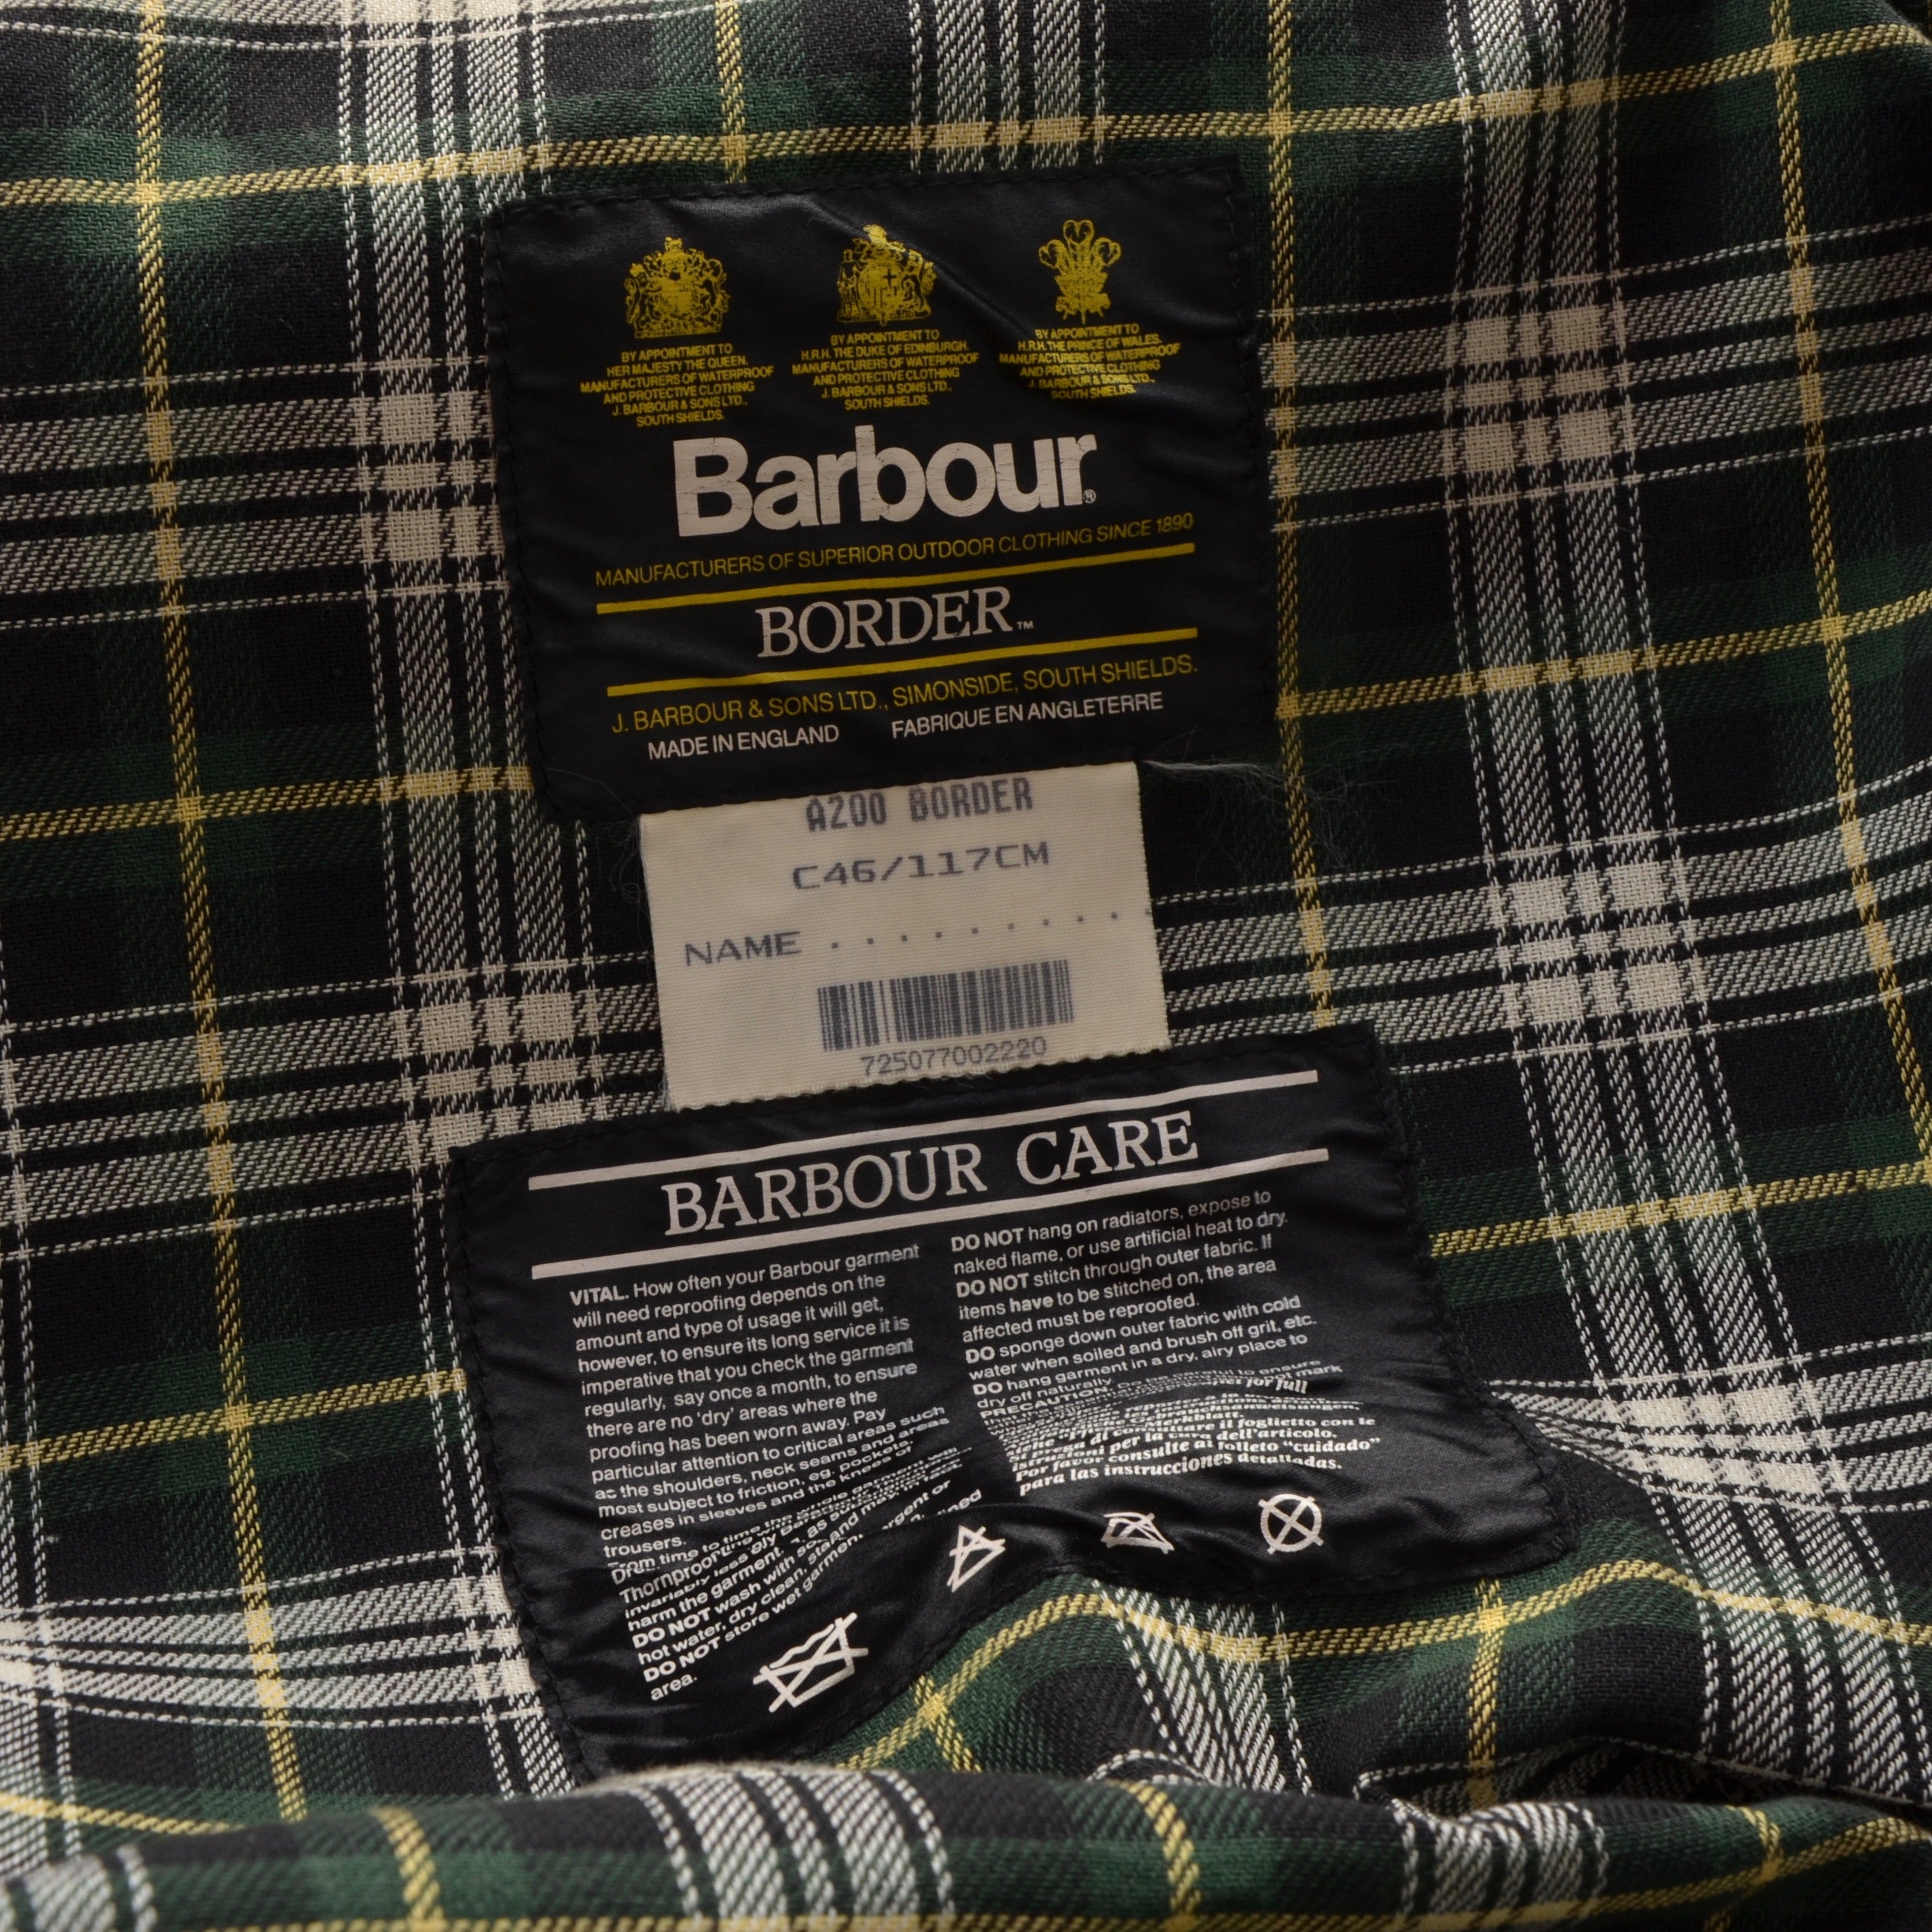 Barbour Border jacket in blue waxed cotton, mans model code C 42, its  measures 52-54”